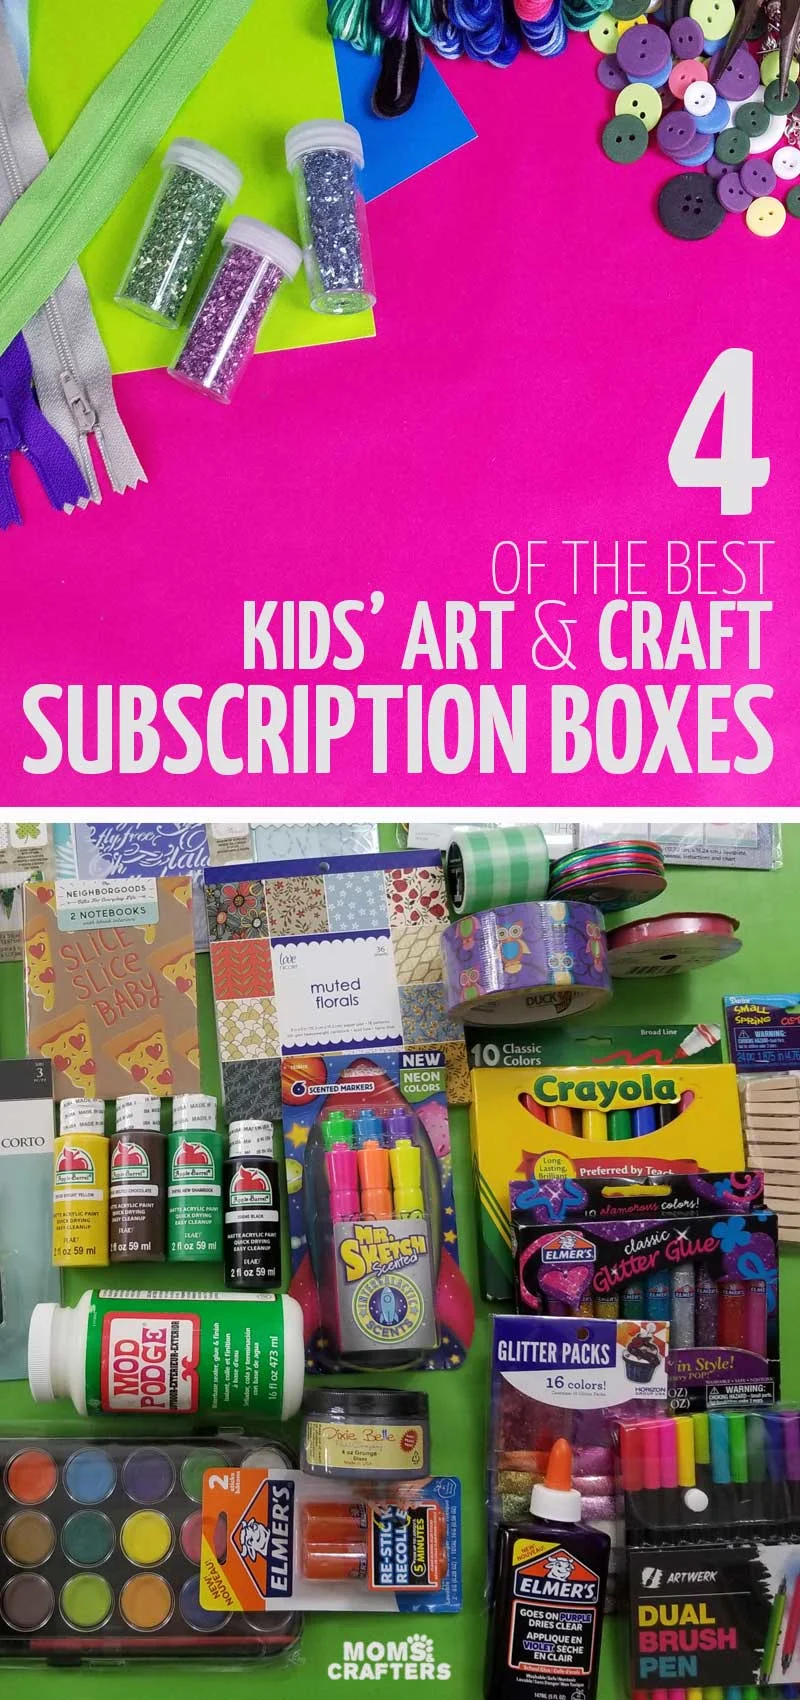 The best kids craft subscription boxes for kids of all ages - toddlers, preschoolers, grade school age, tween and teen! This includes monthly STEM and STEAM activities, arts and crafts perfect for weekends